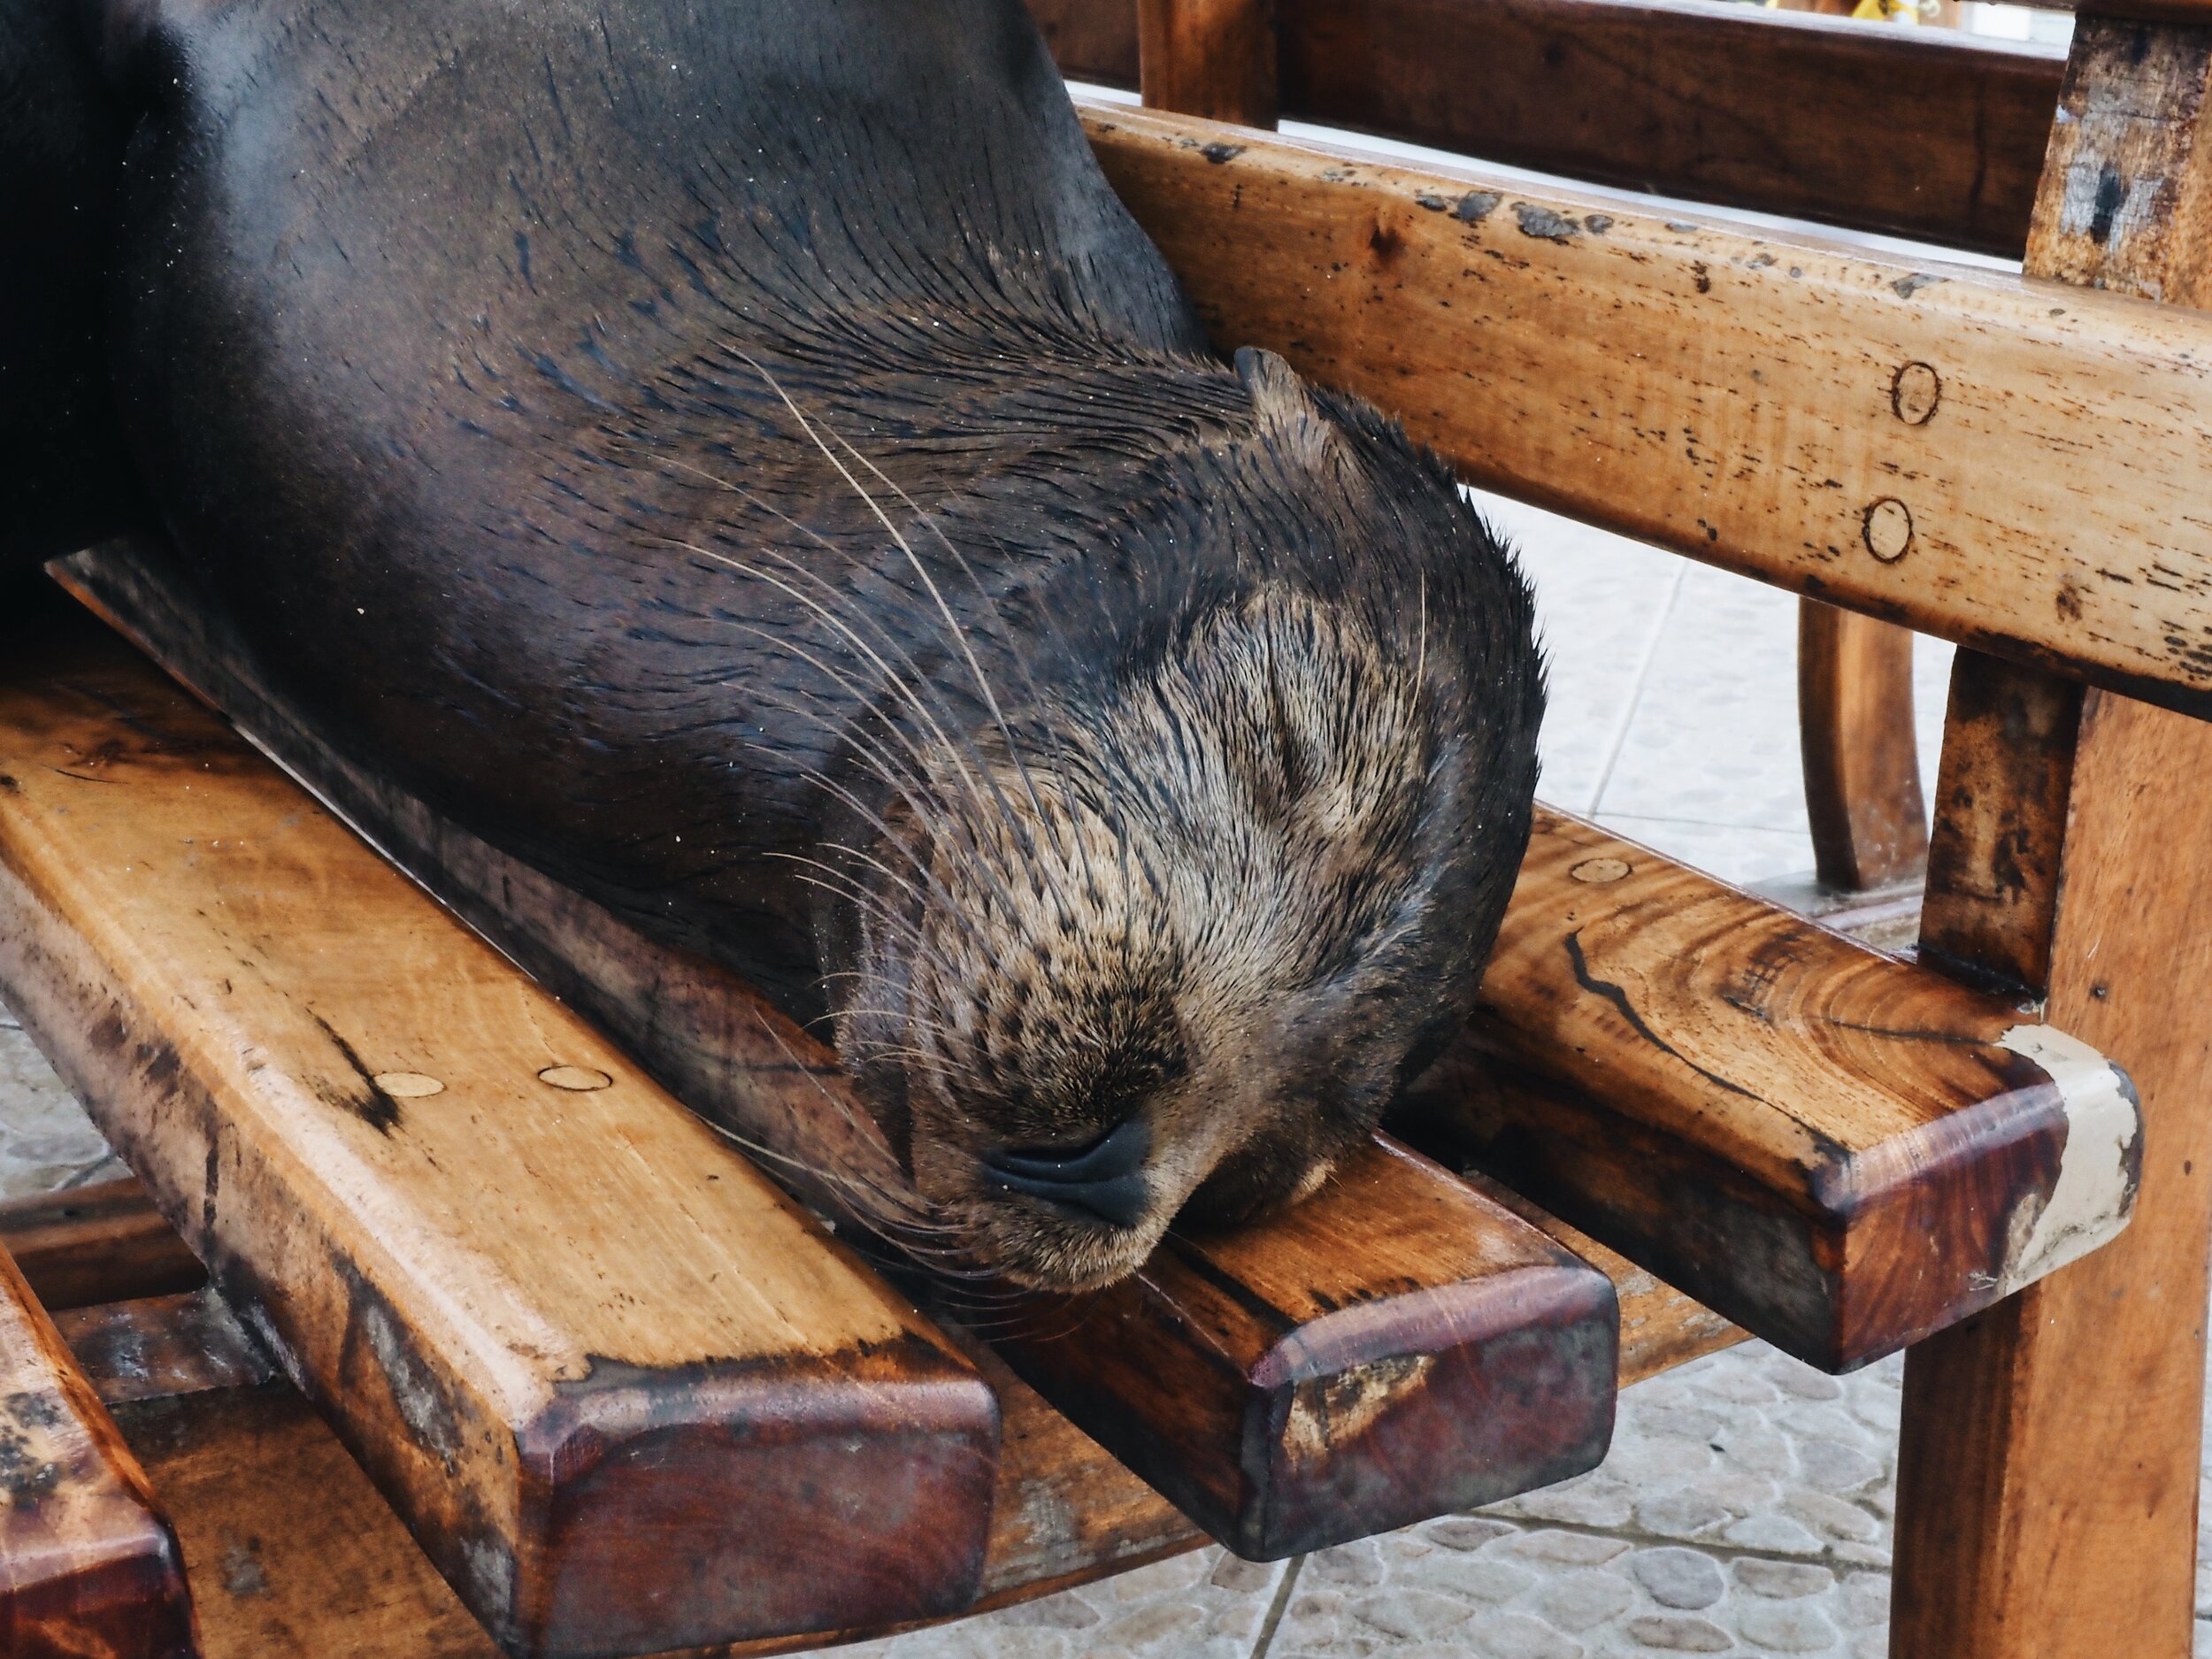  nap time at the pier, Puerto Ayora 